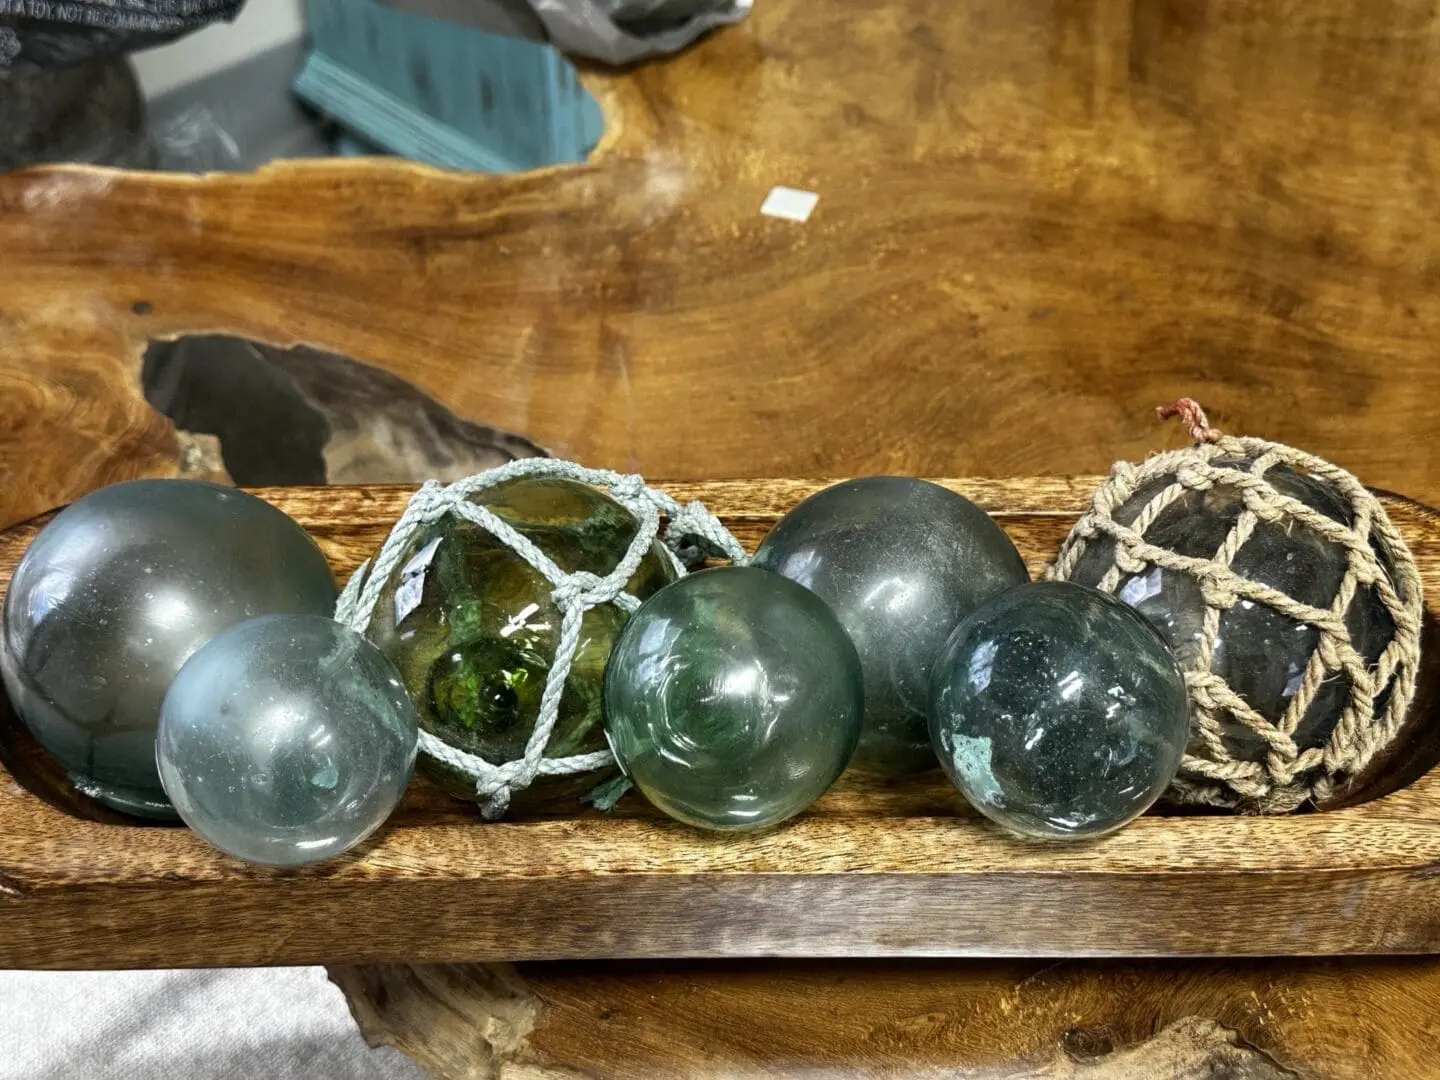 A wooden tray holding glass floats and rope.